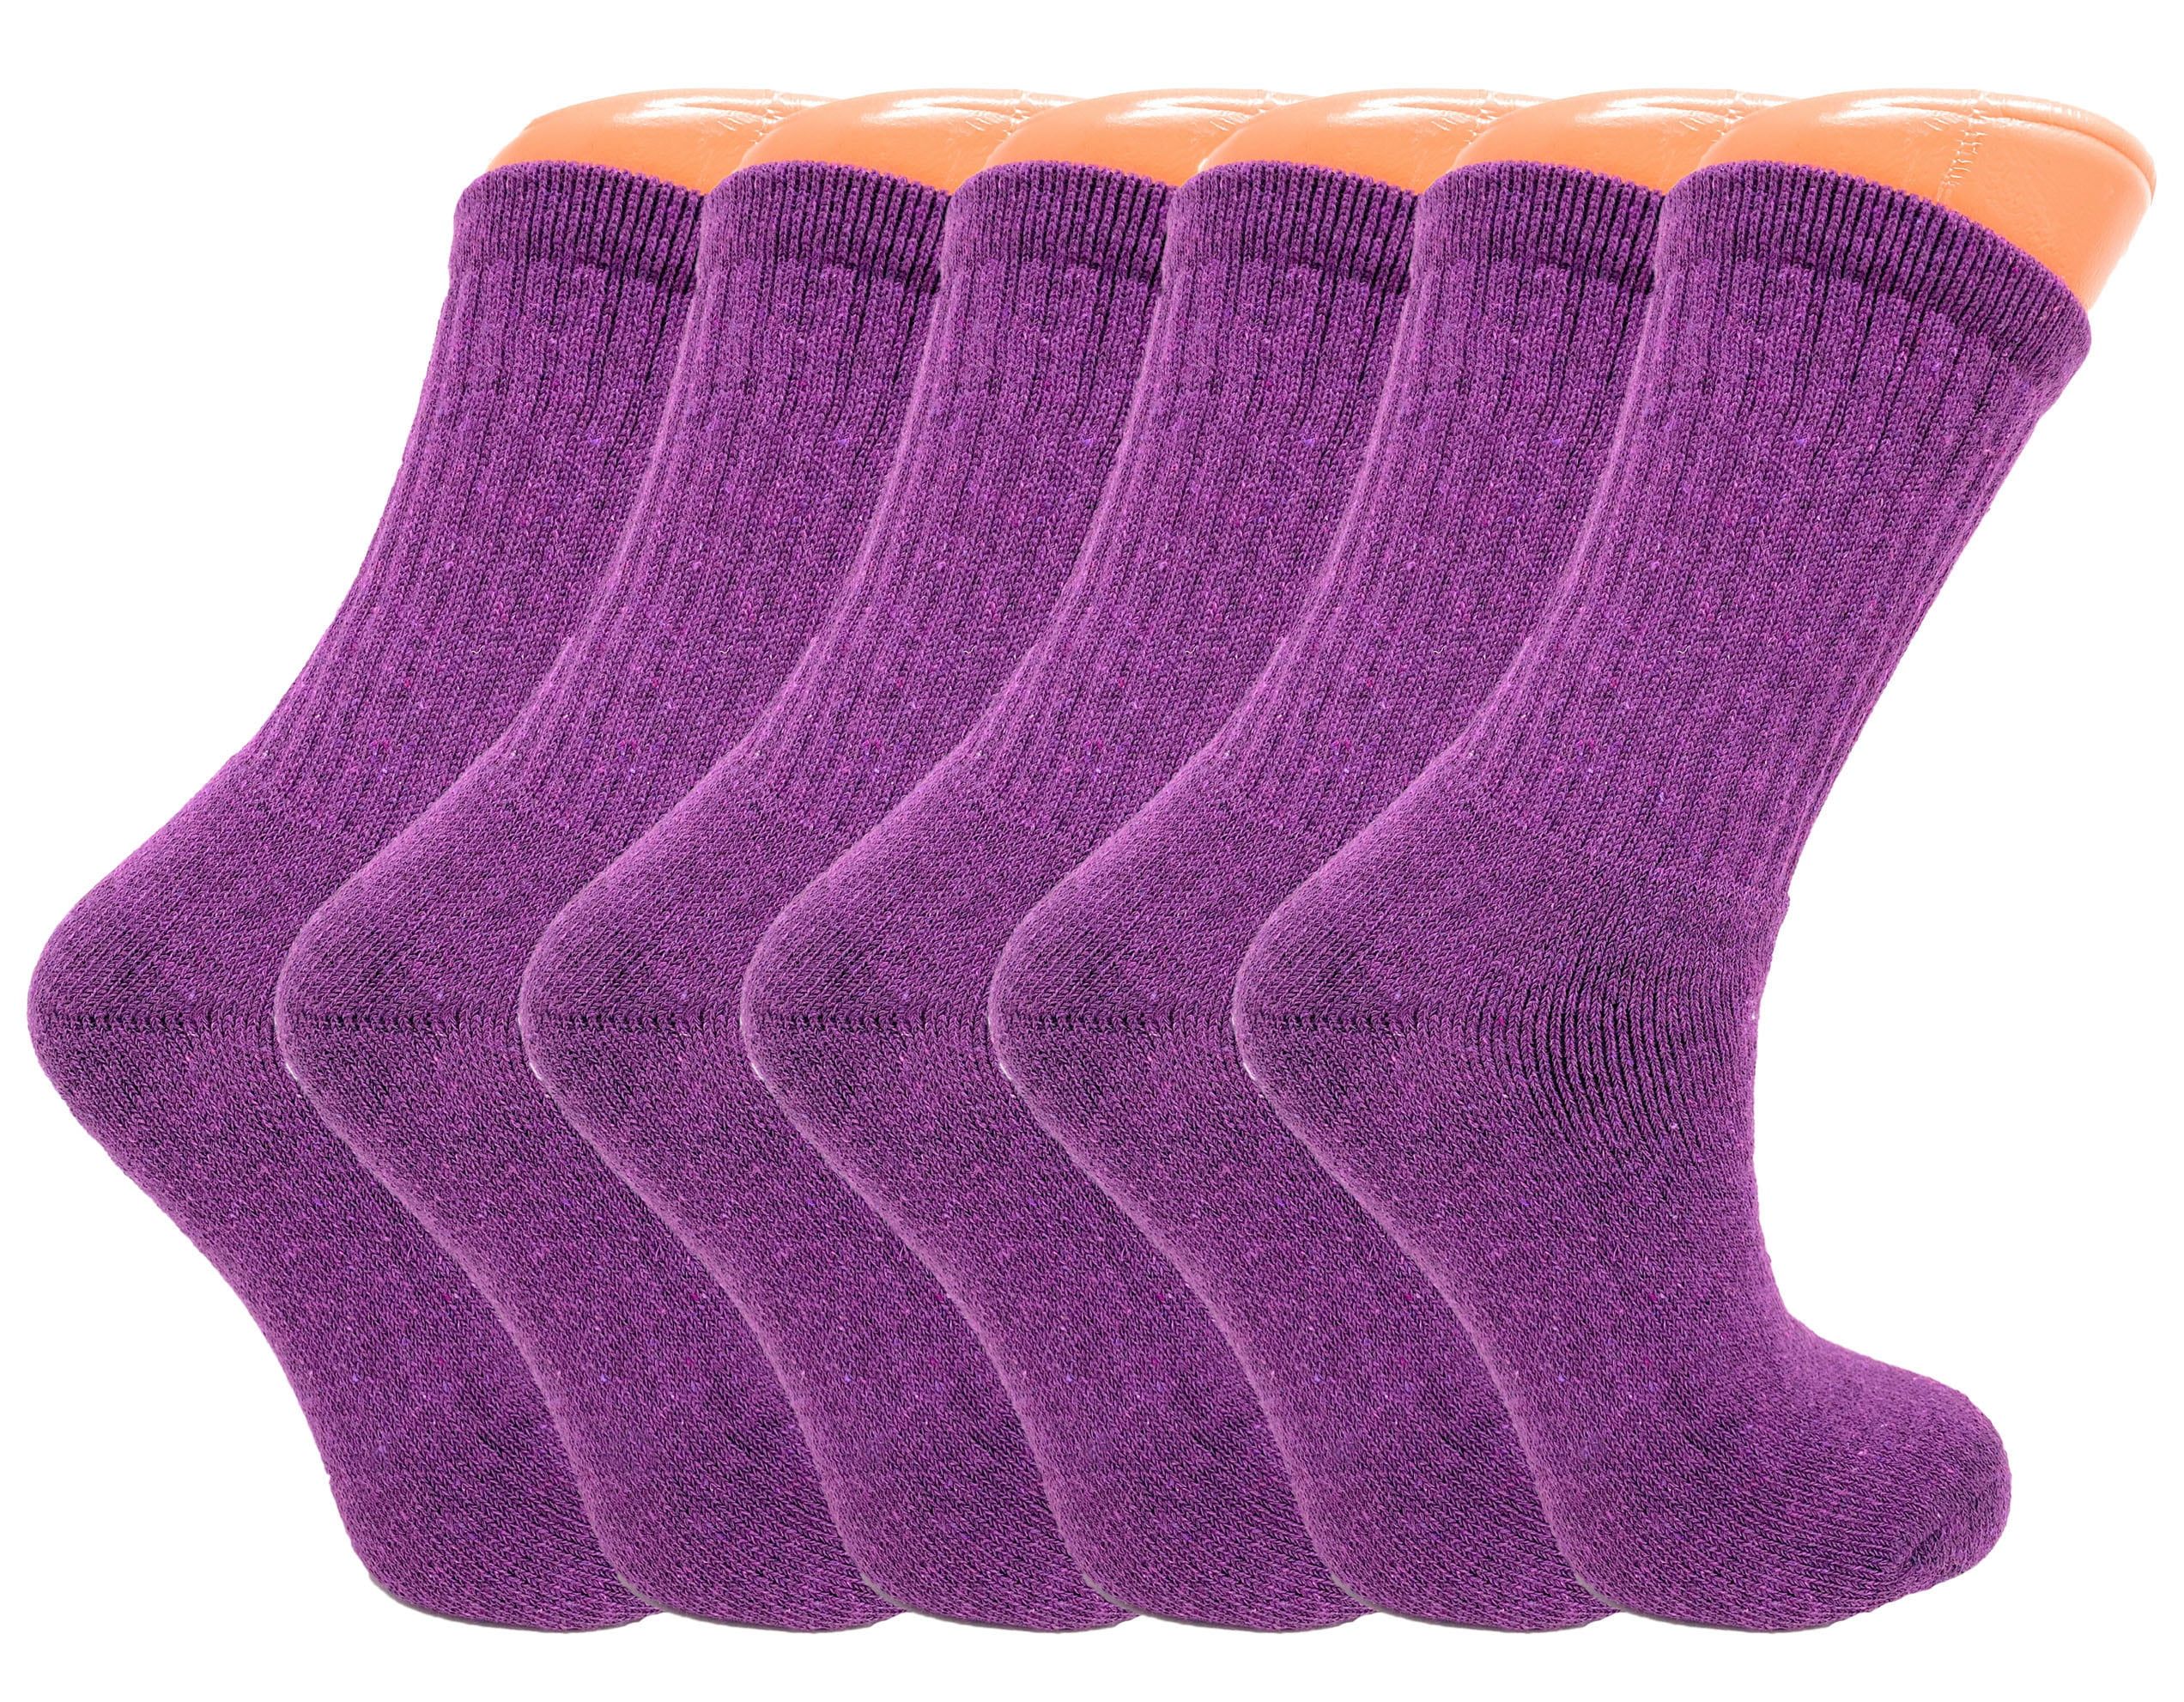 4 Pair's Womens 9-11 ANKLE Socks,Cotton White Gray Pick Purple Athletic M THICK 